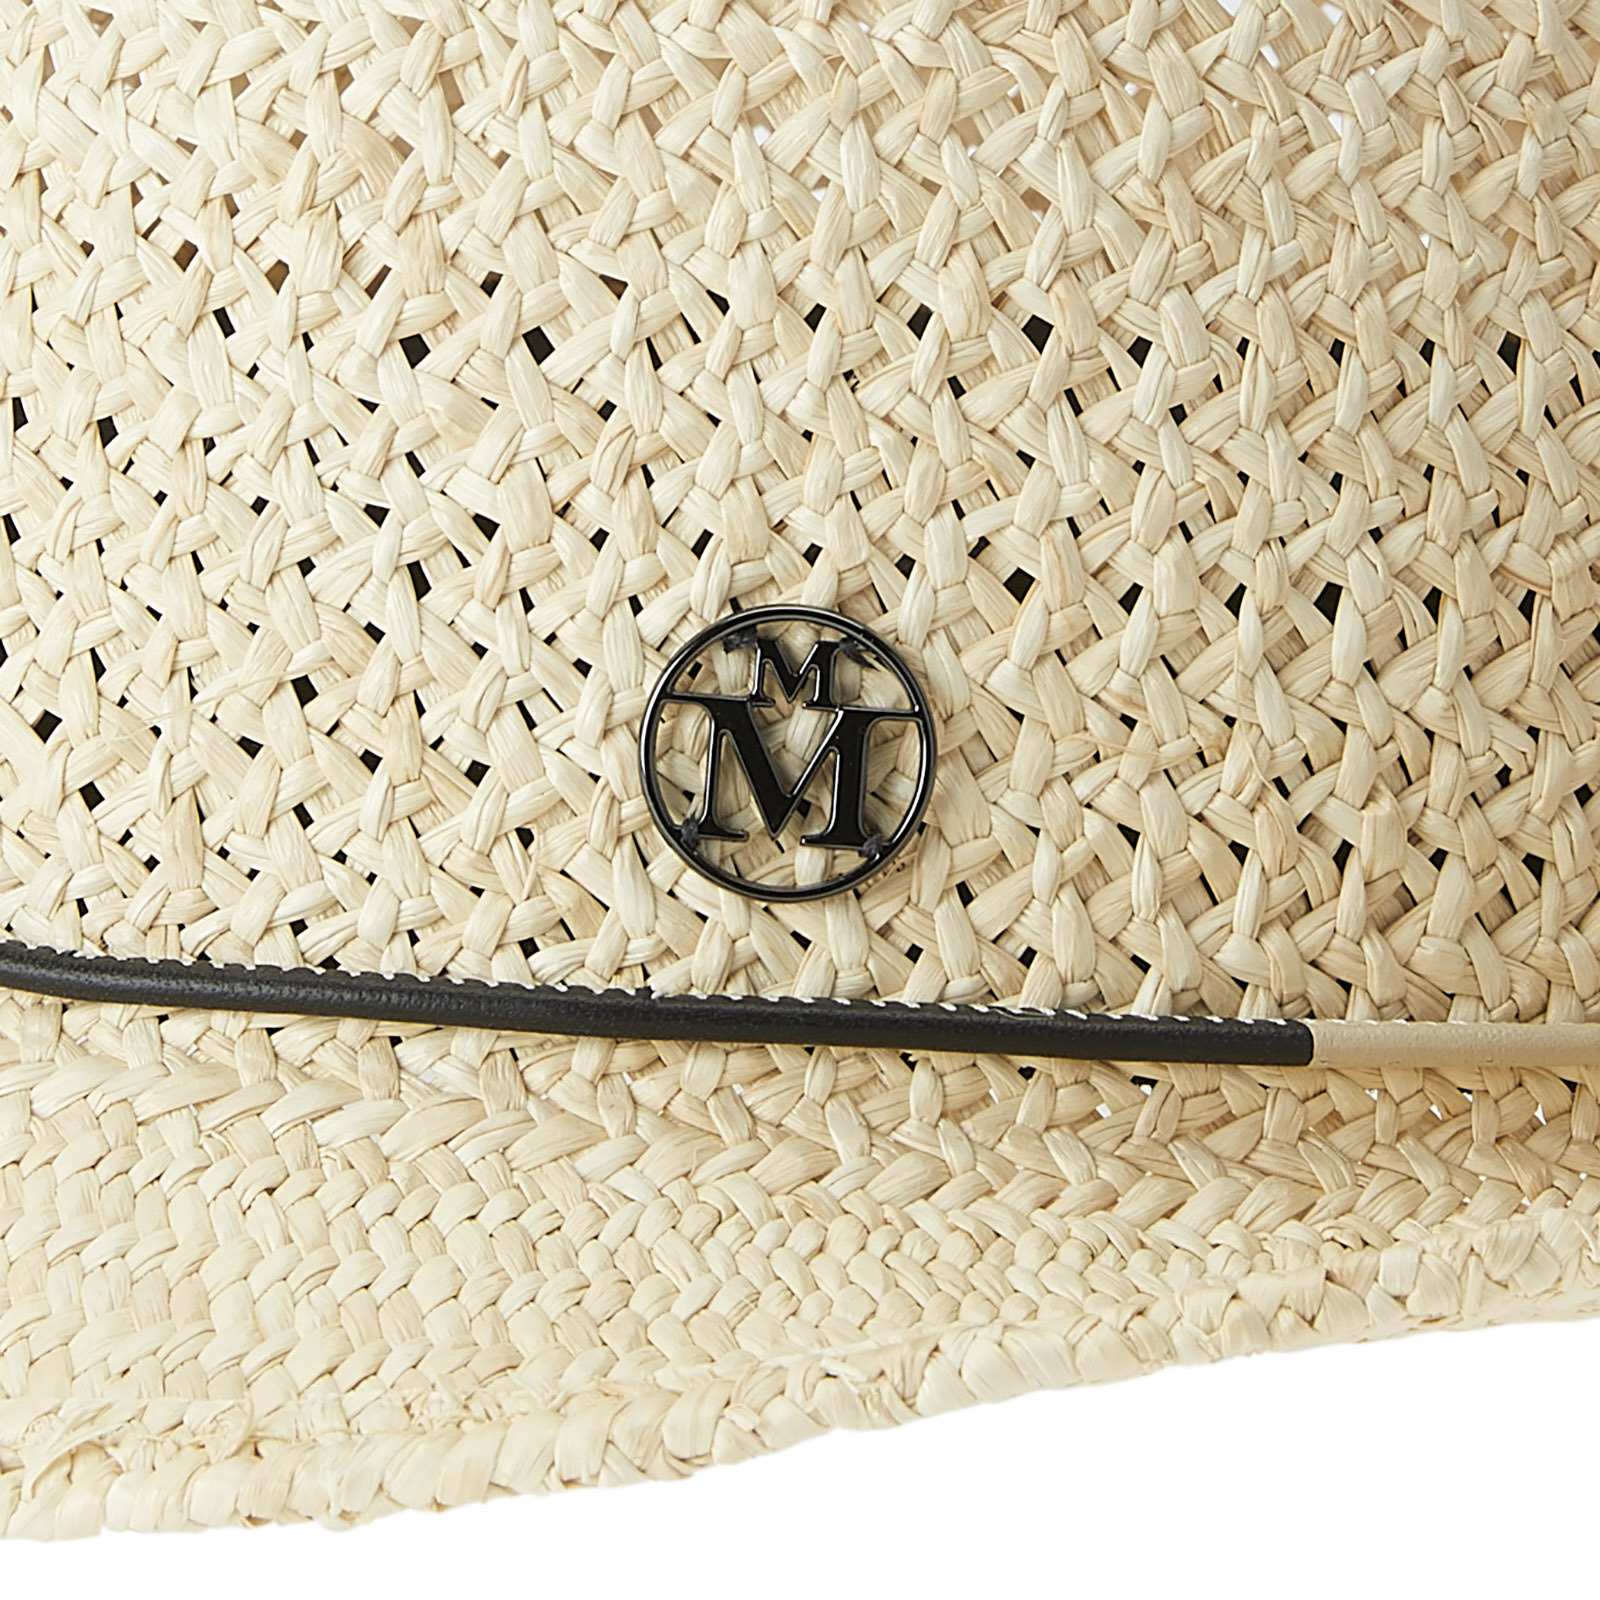 Trilby hat made of brisa straw with a black and beige leather lace